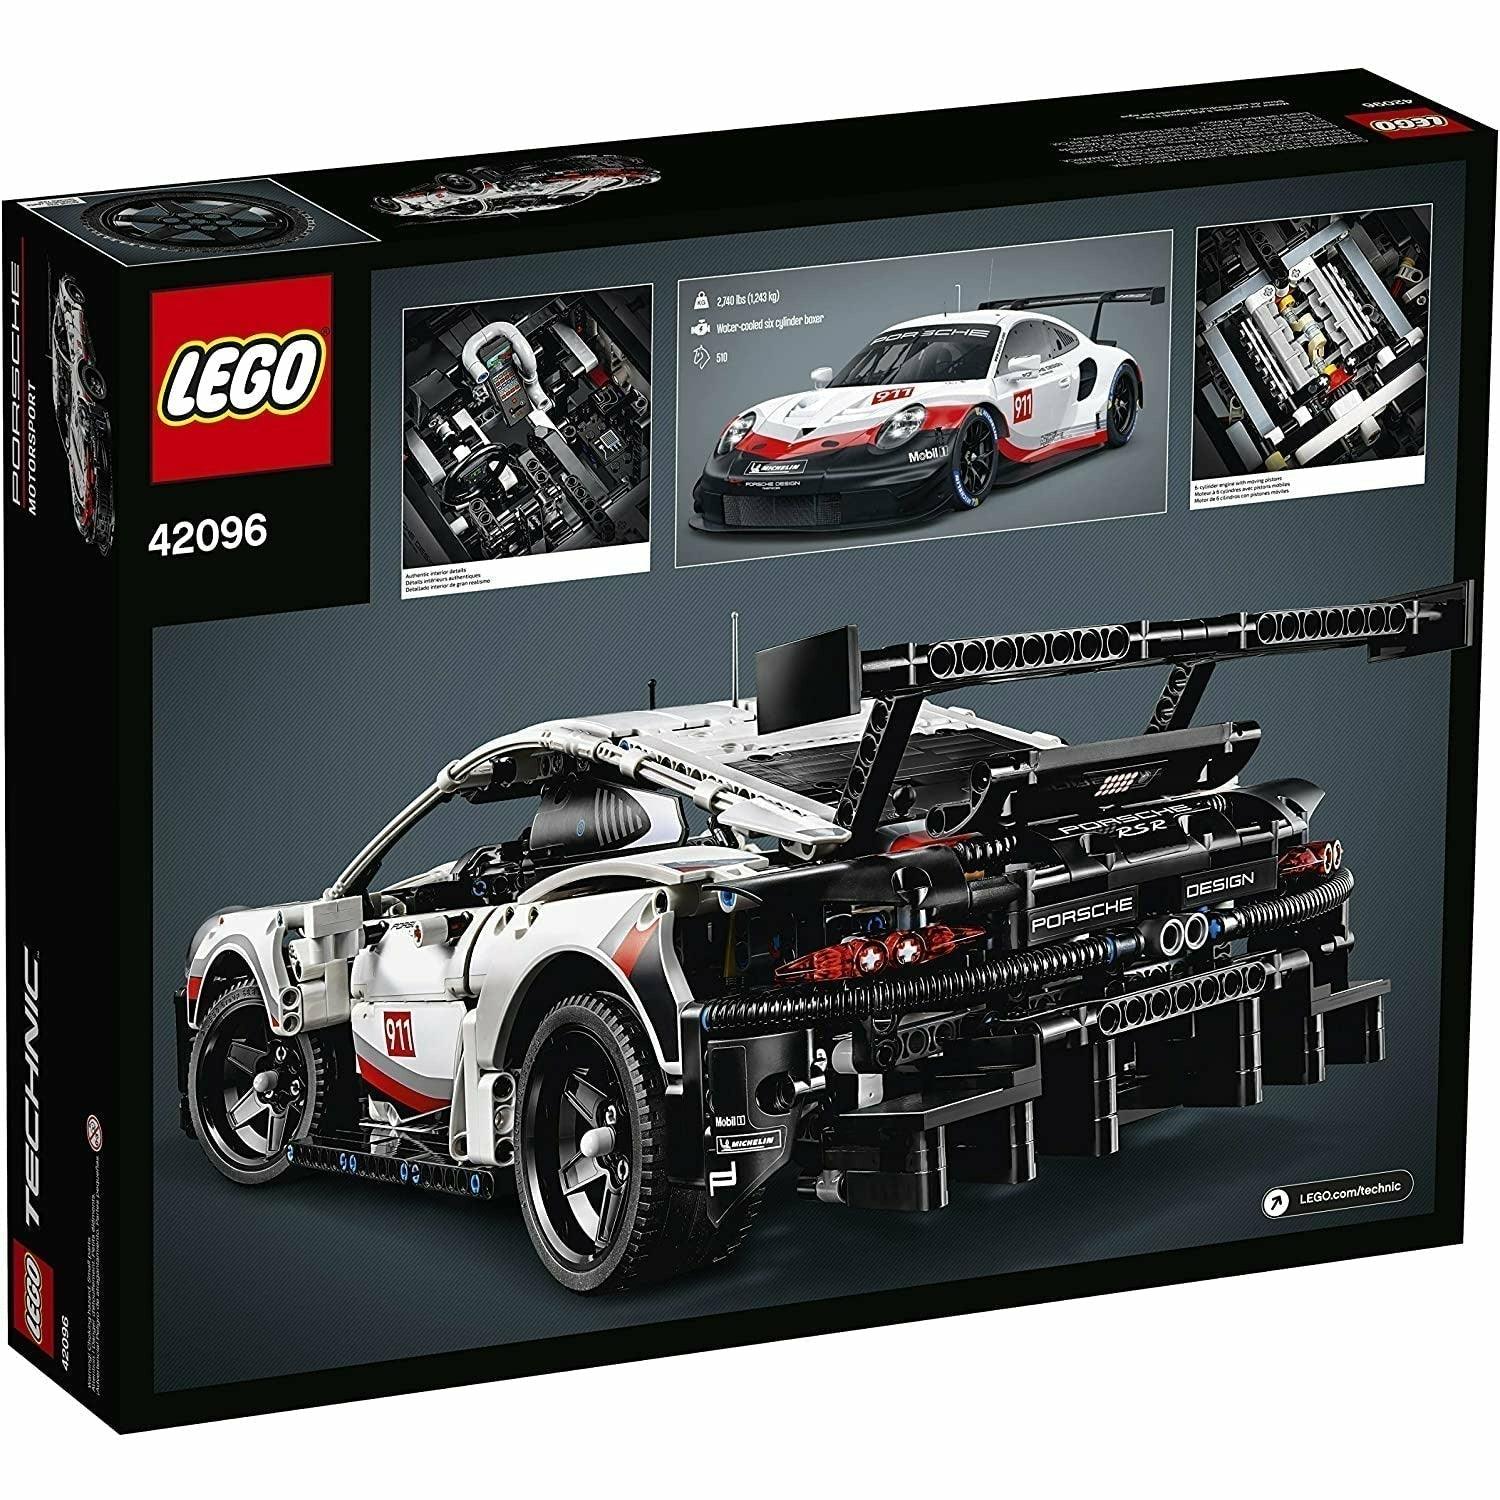 LEGO Technic Porsche 911 RSR 42096 Race Car Building Set STEM Toy for Boys and Girls Ages 10+ Features Porsche Model Car with Toy Engine (1,580 Pieces) - BumbleToys - 14 Years & Up, 8+ Years, 8-13 Years, Boys, Cars, LEGO, OXE, Pre-Order, Technic